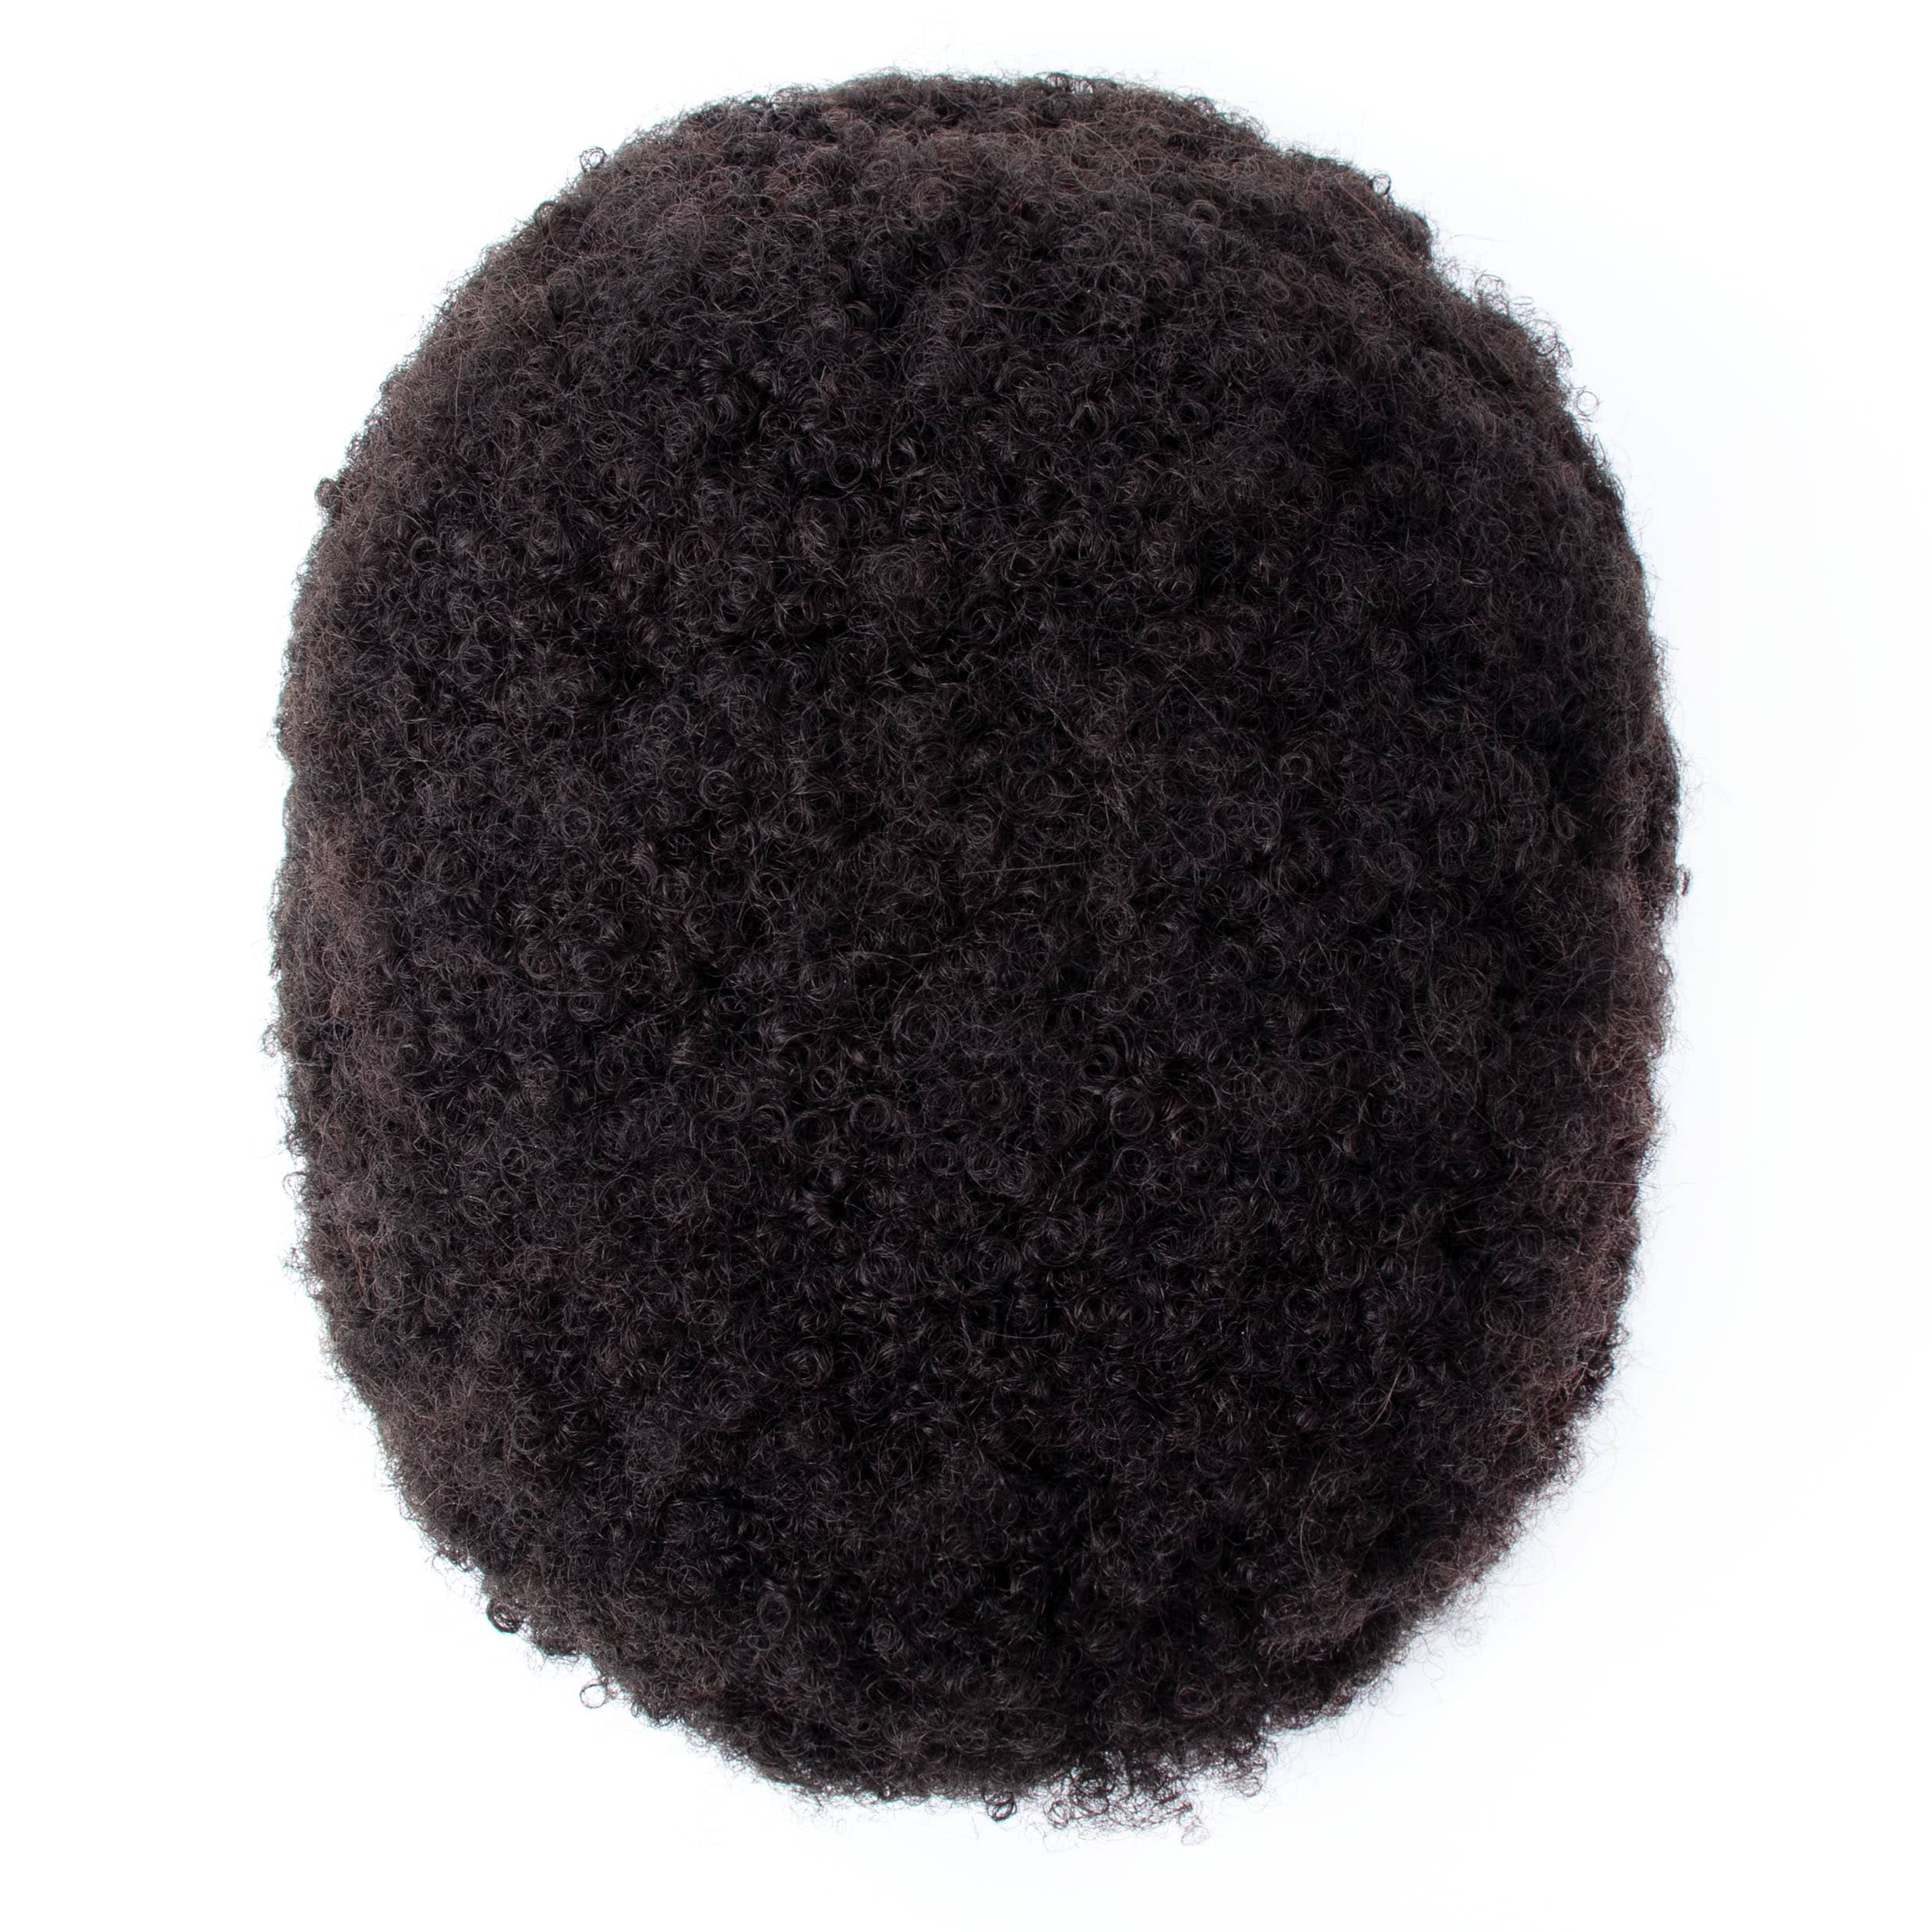 GEXWIGS African American Afro Men’s Hair System Full Lace